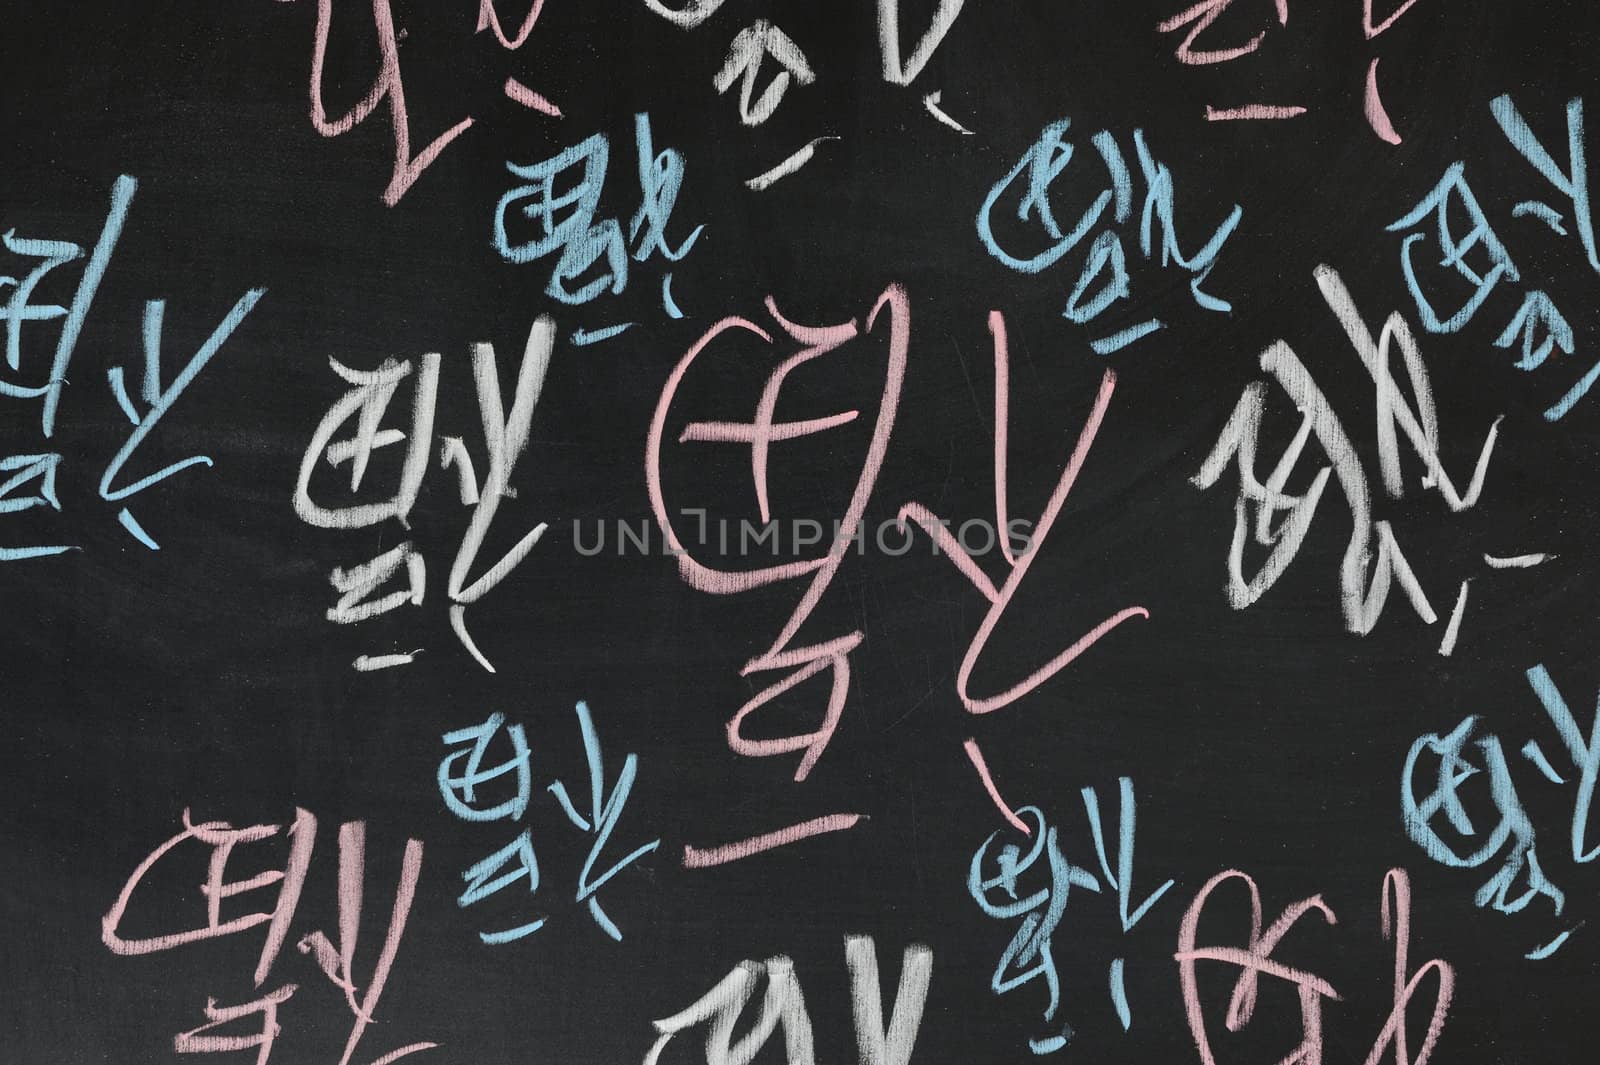 Chalkboard drawing - Group of inverted Chinese word 'Fu' which means 'happyness has arrived' in China